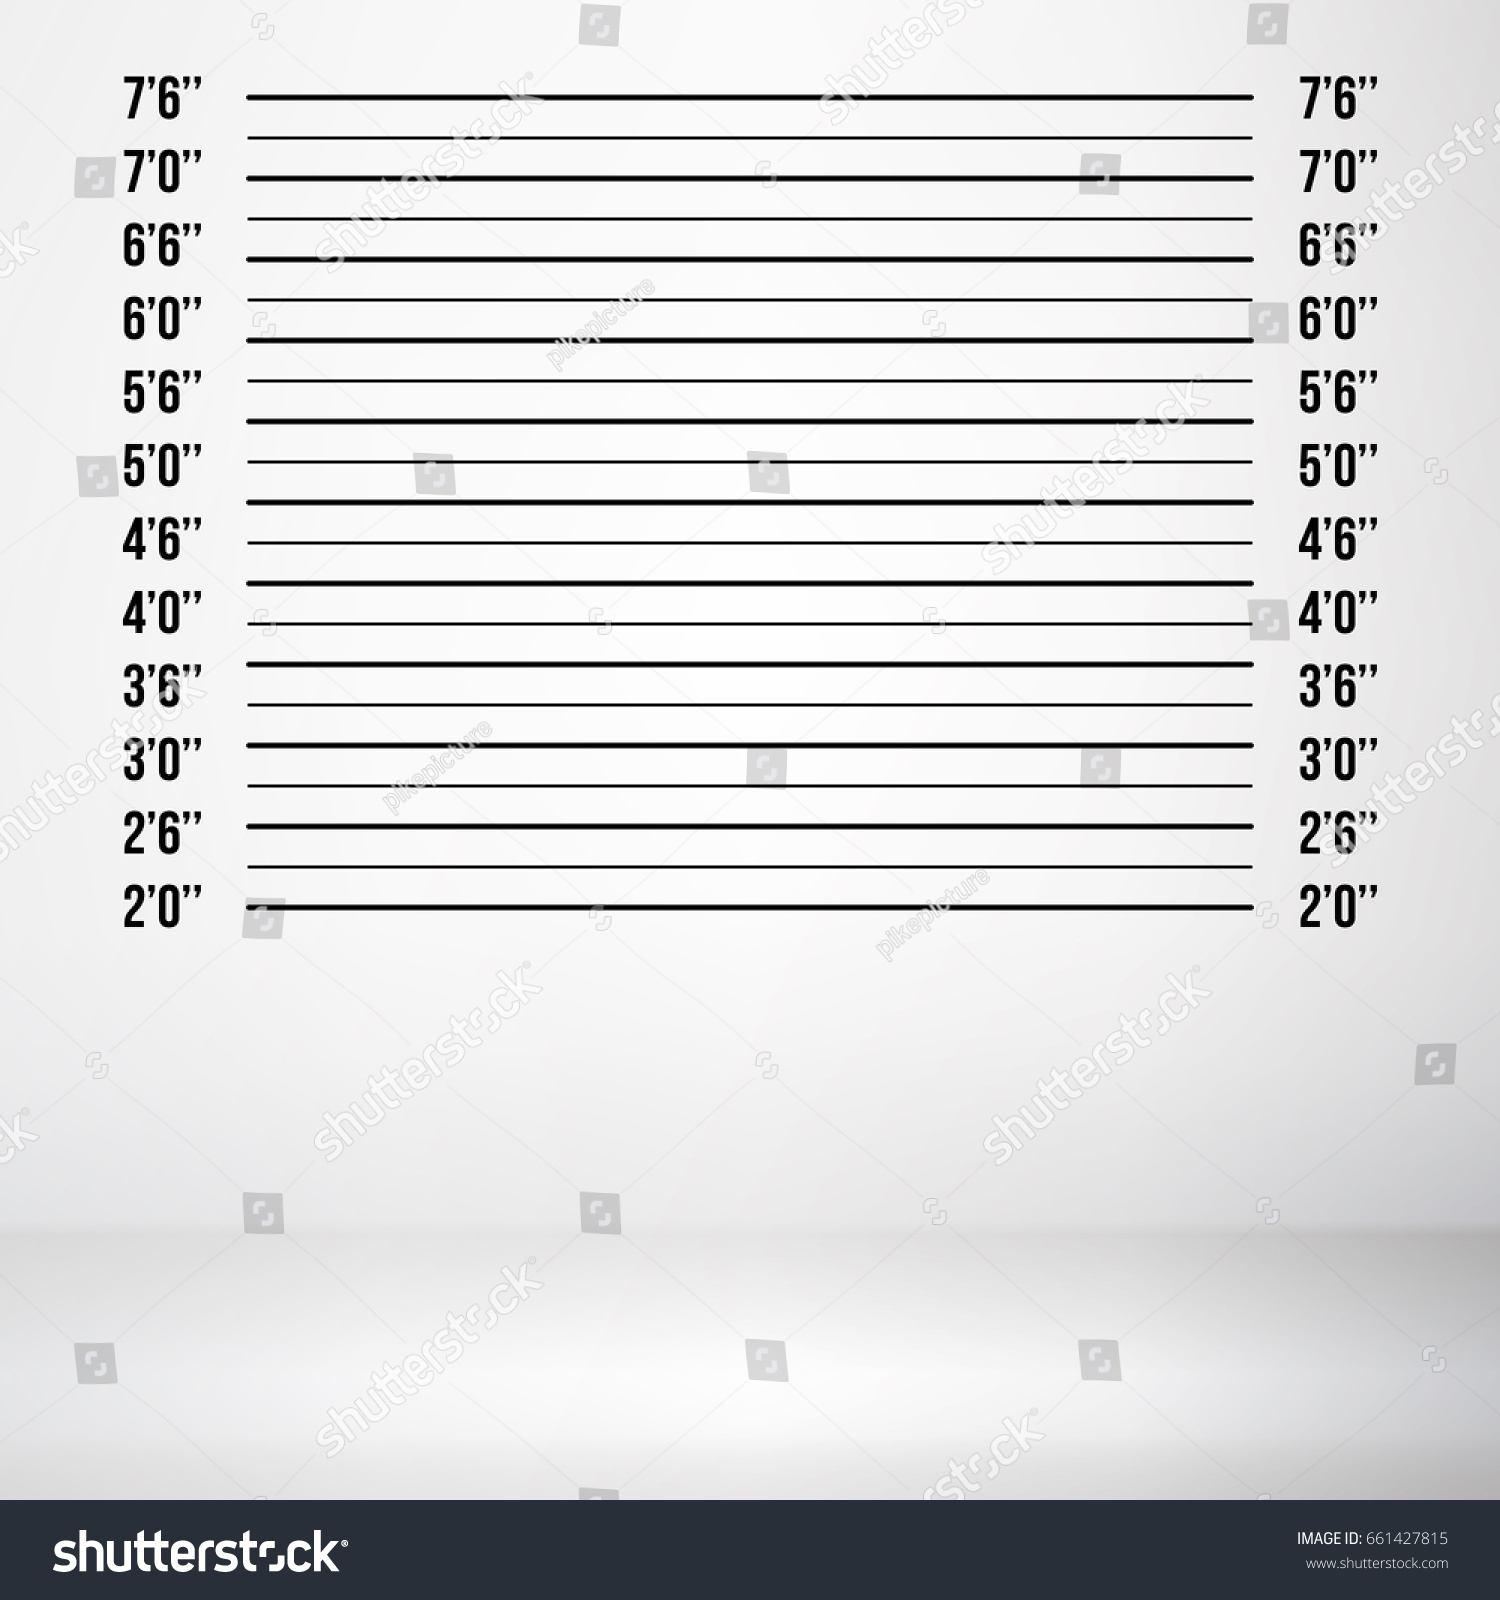 Police Wall Lineup Metrical Imperial Prison Stock Vector (Royalty Free ...